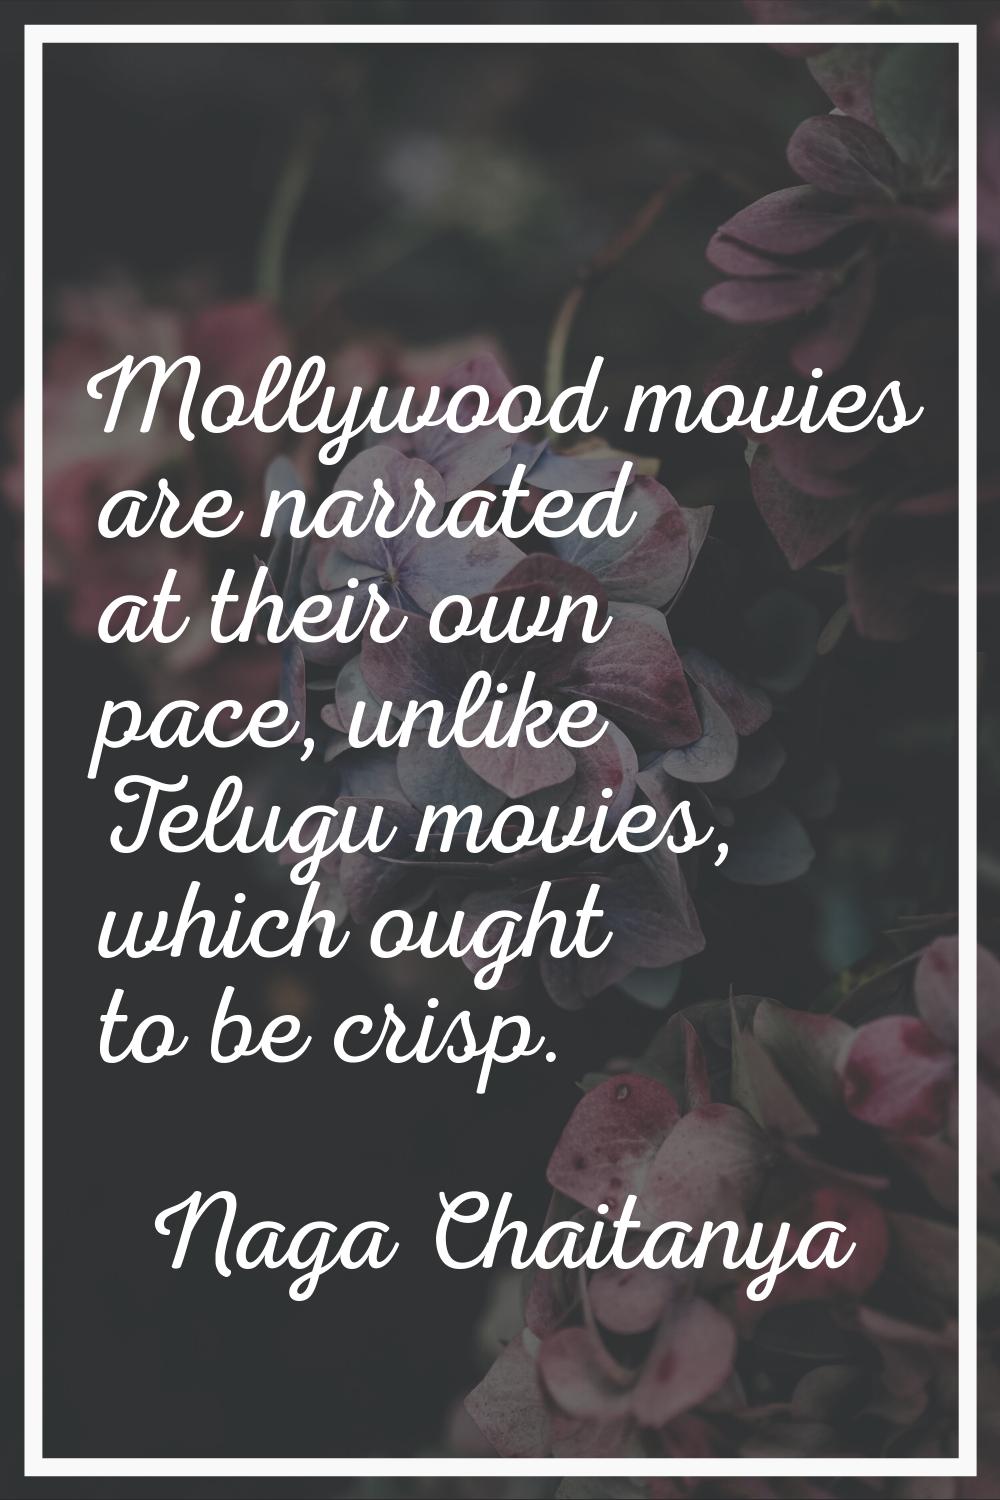 Mollywood movies are narrated at their own pace, unlike Telugu movies, which ought to be crisp.